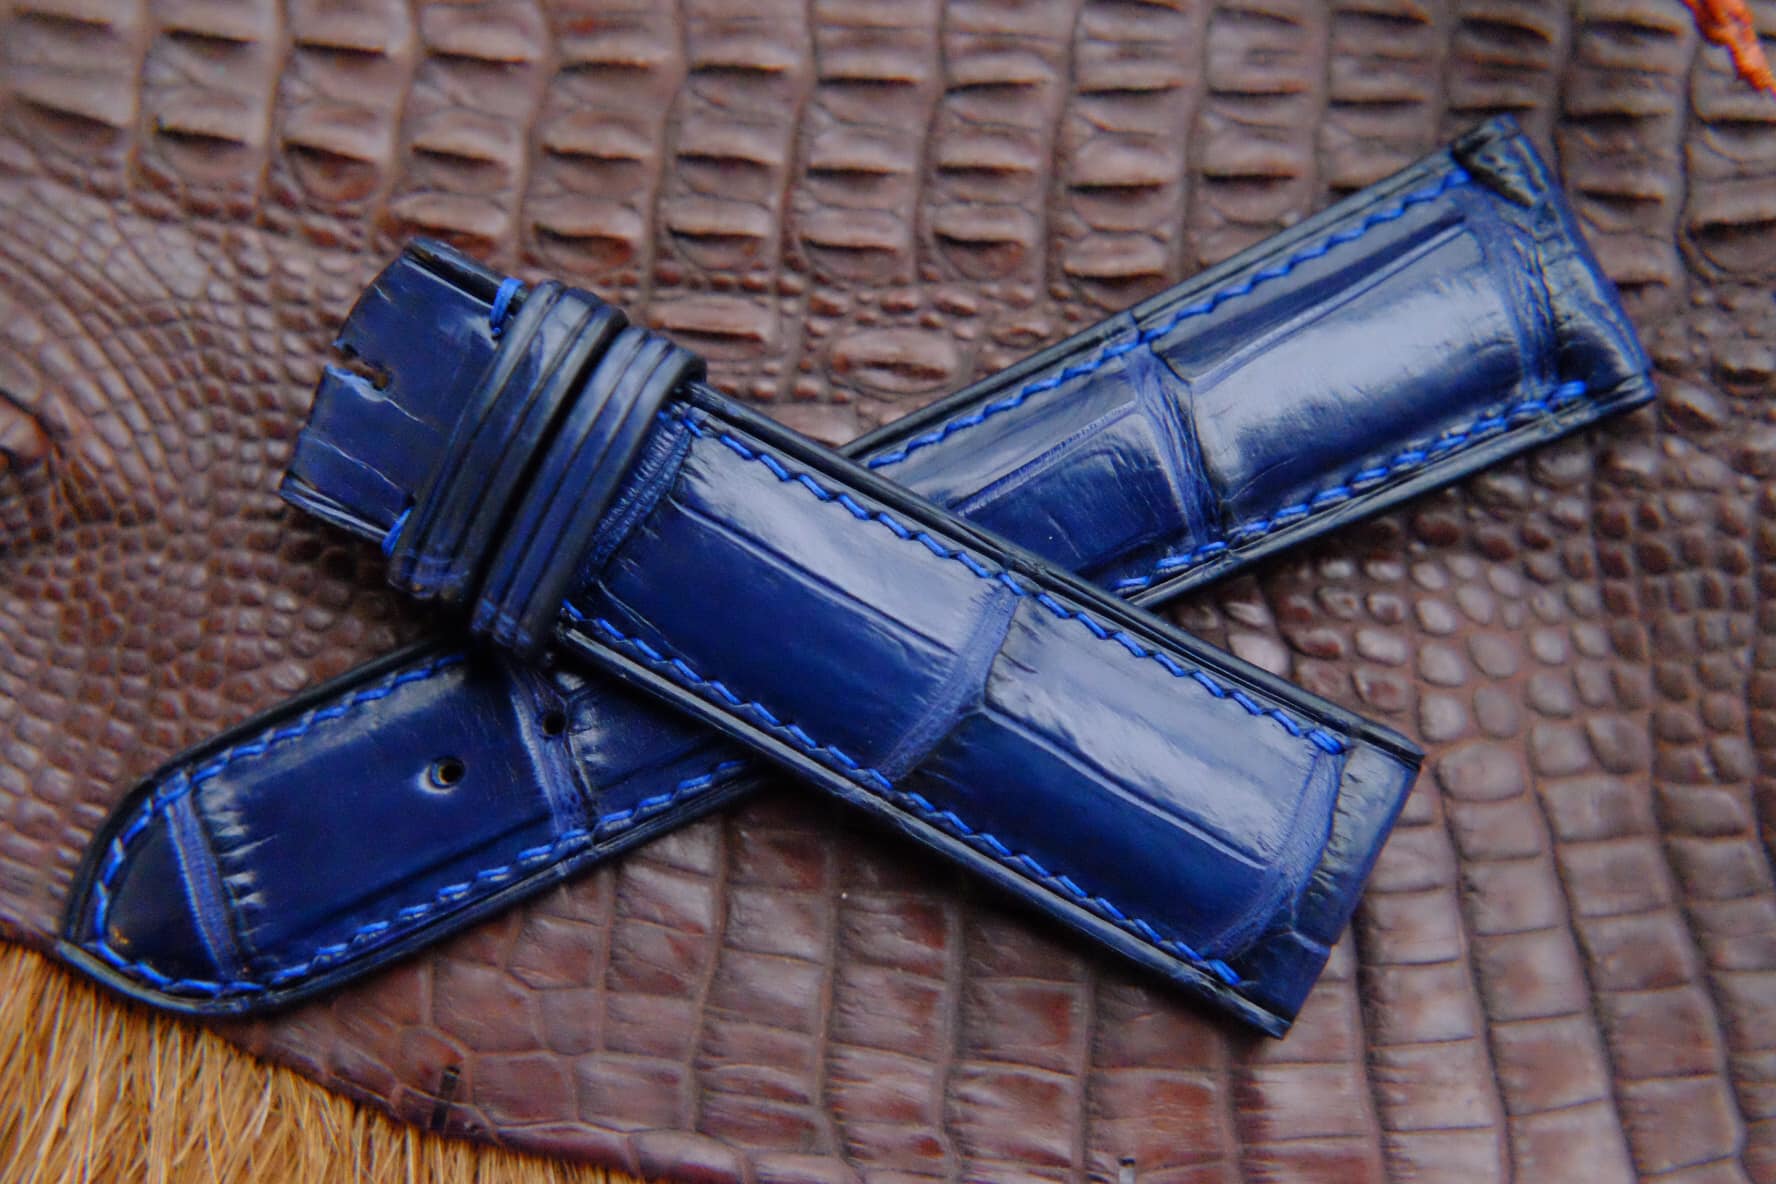  Stonestreet Leather, Sapphire Blue Exotic Alligator/Crocodile  Embossed Cowhide Leather, 2-1/2 oz - 3-1/2 oz Straps/Strips